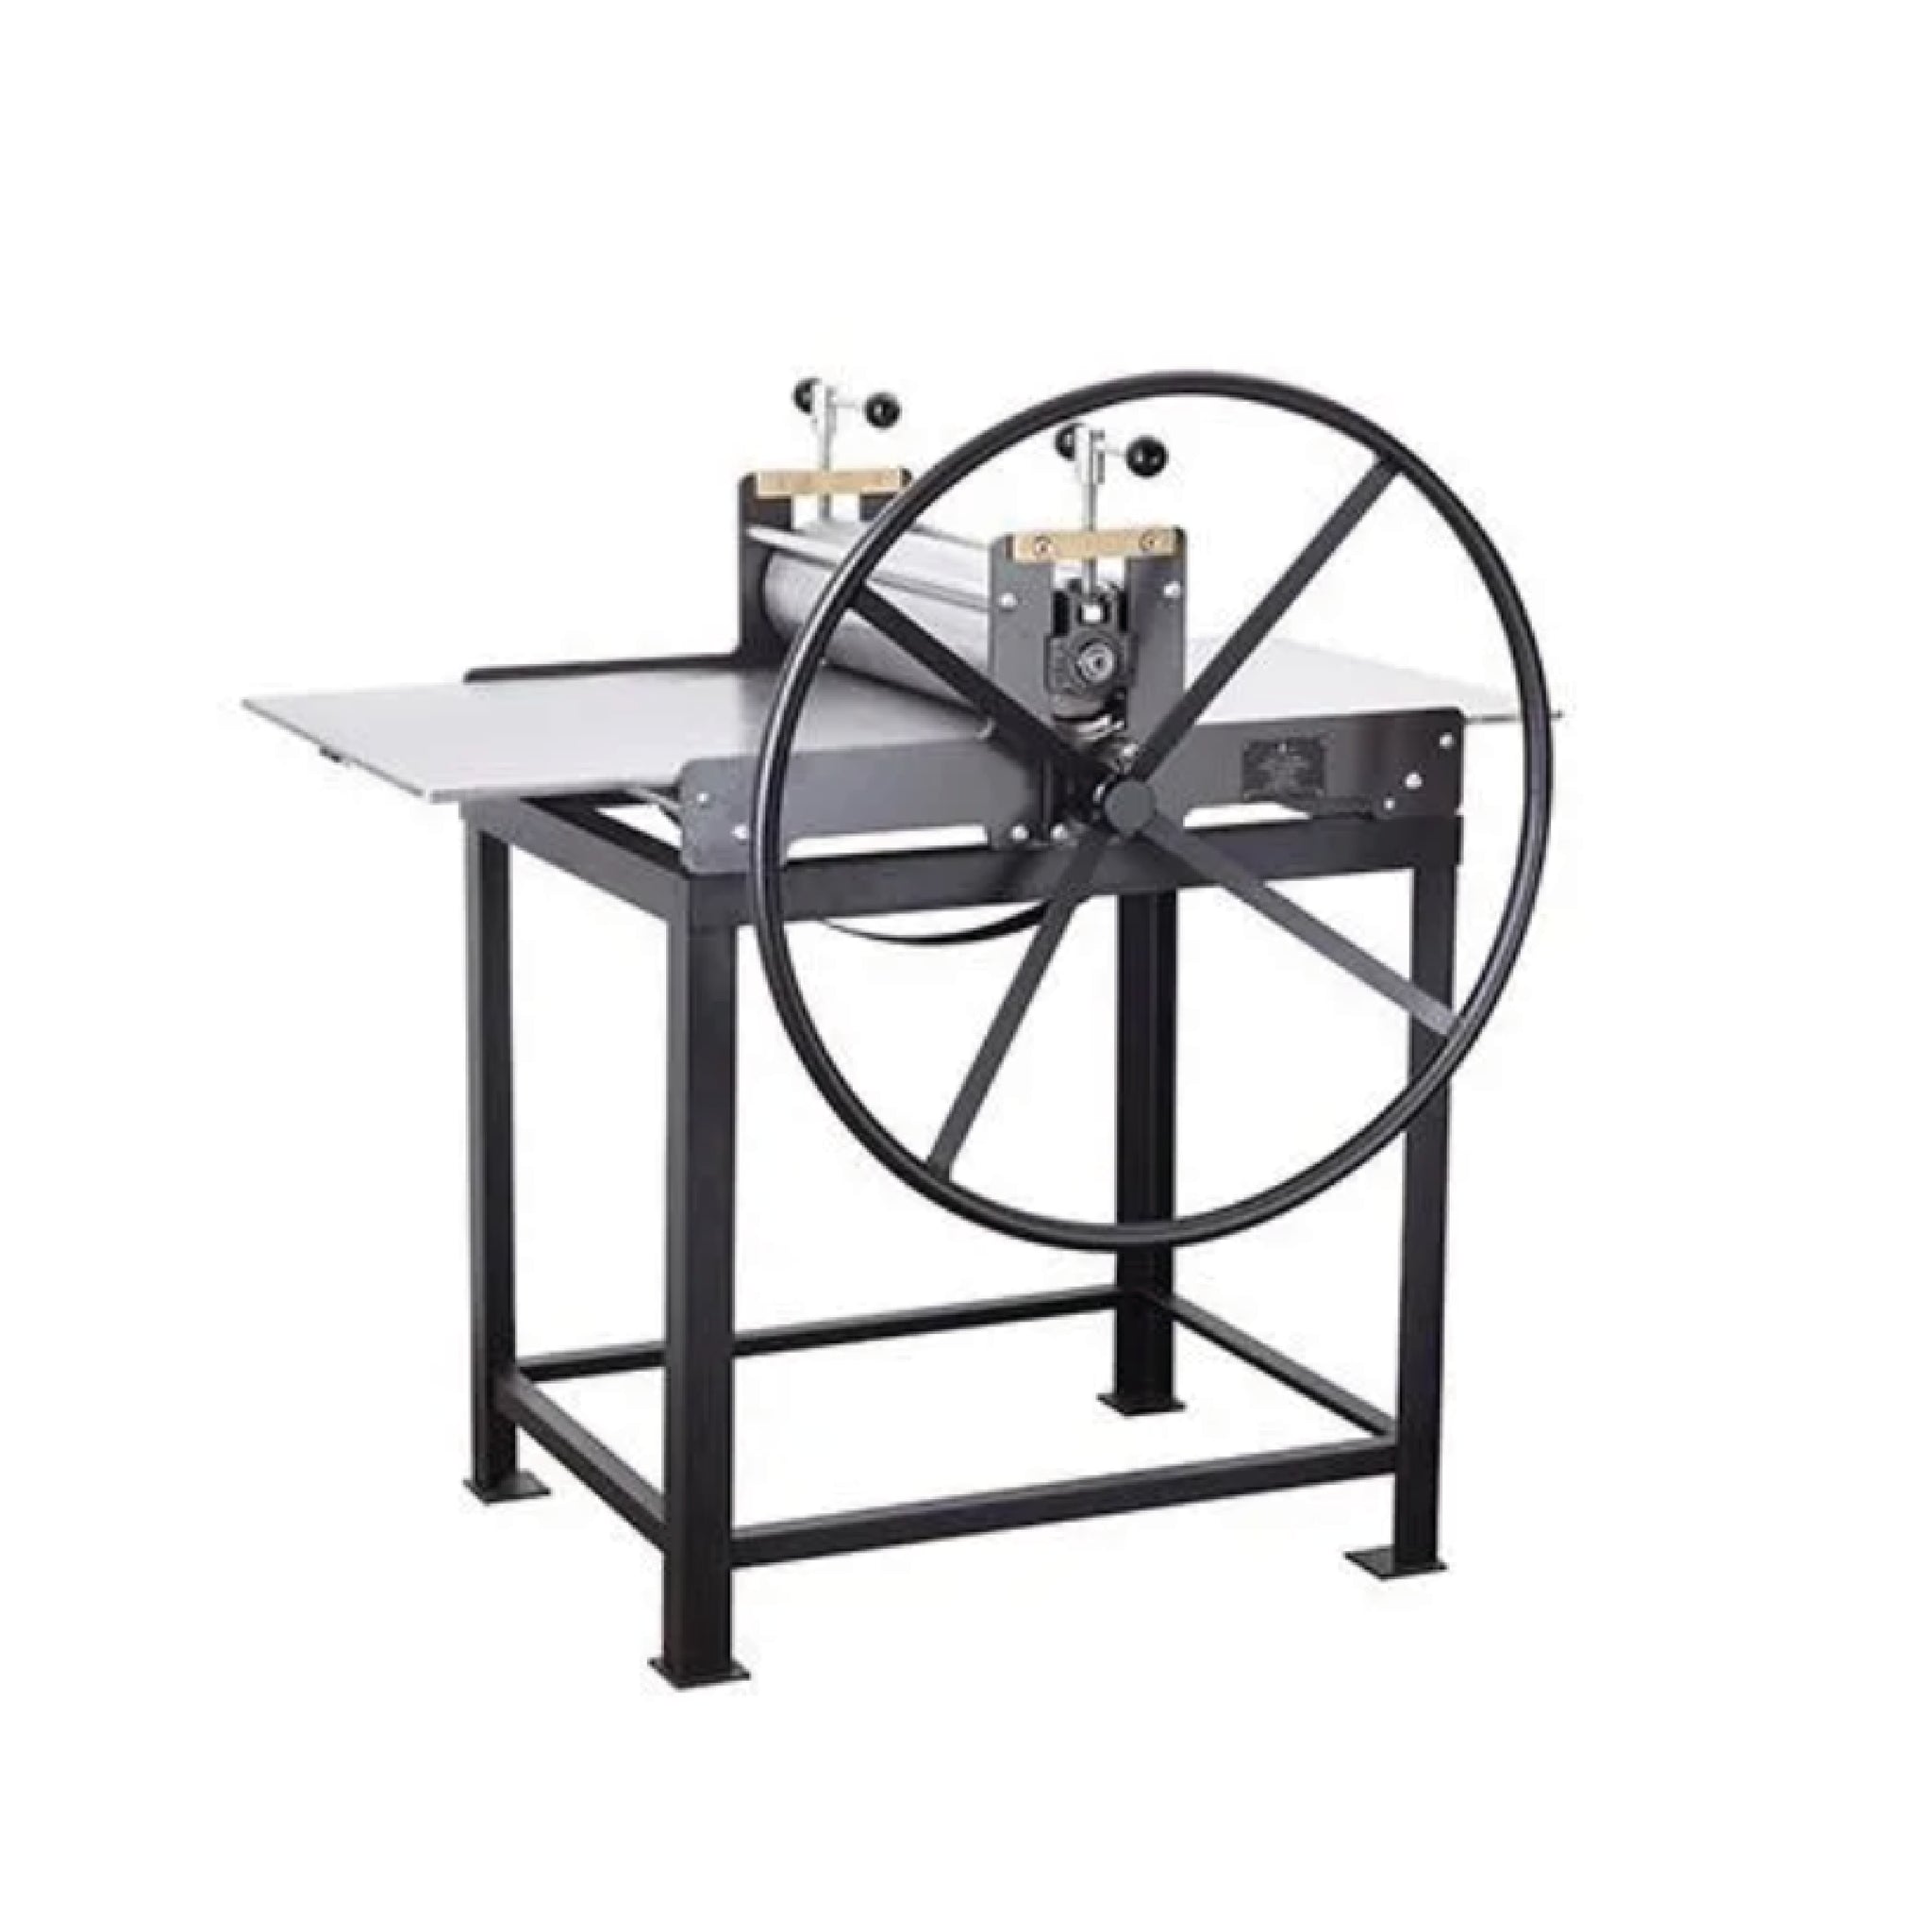 500 Direct Drive Press by Fitzroy Etching Presses - Melbourne Etching Supplies